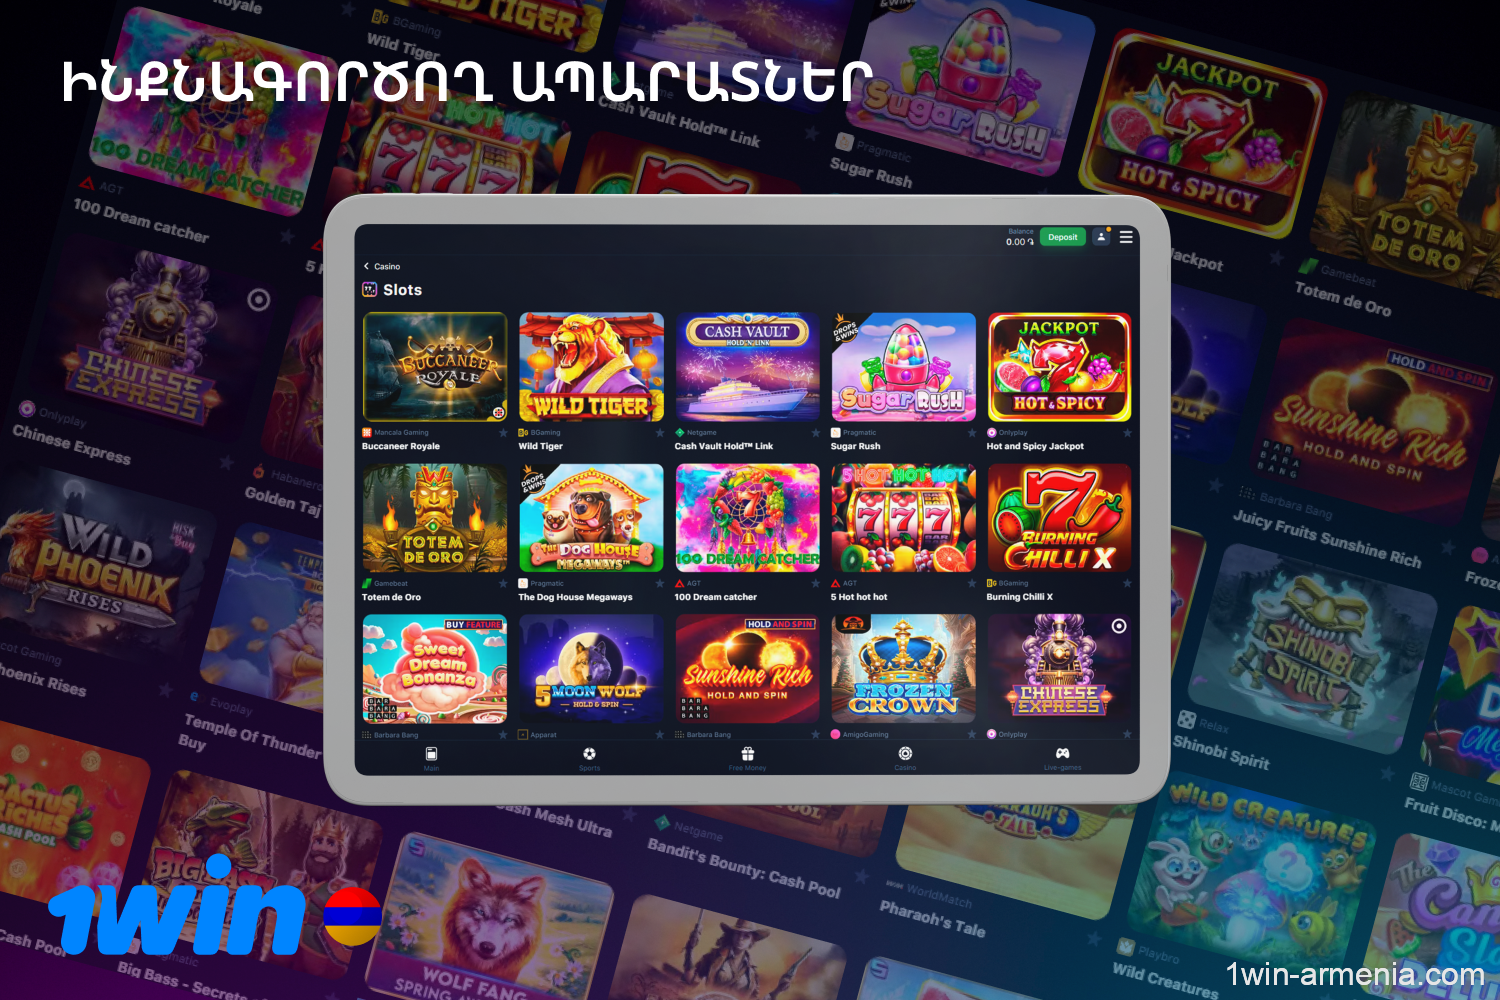 1win users have access to more than 10,000 slots from well-known and licensed providers such as Pragmatic Play, NetEnt, BGaming, PG Soft, etc.